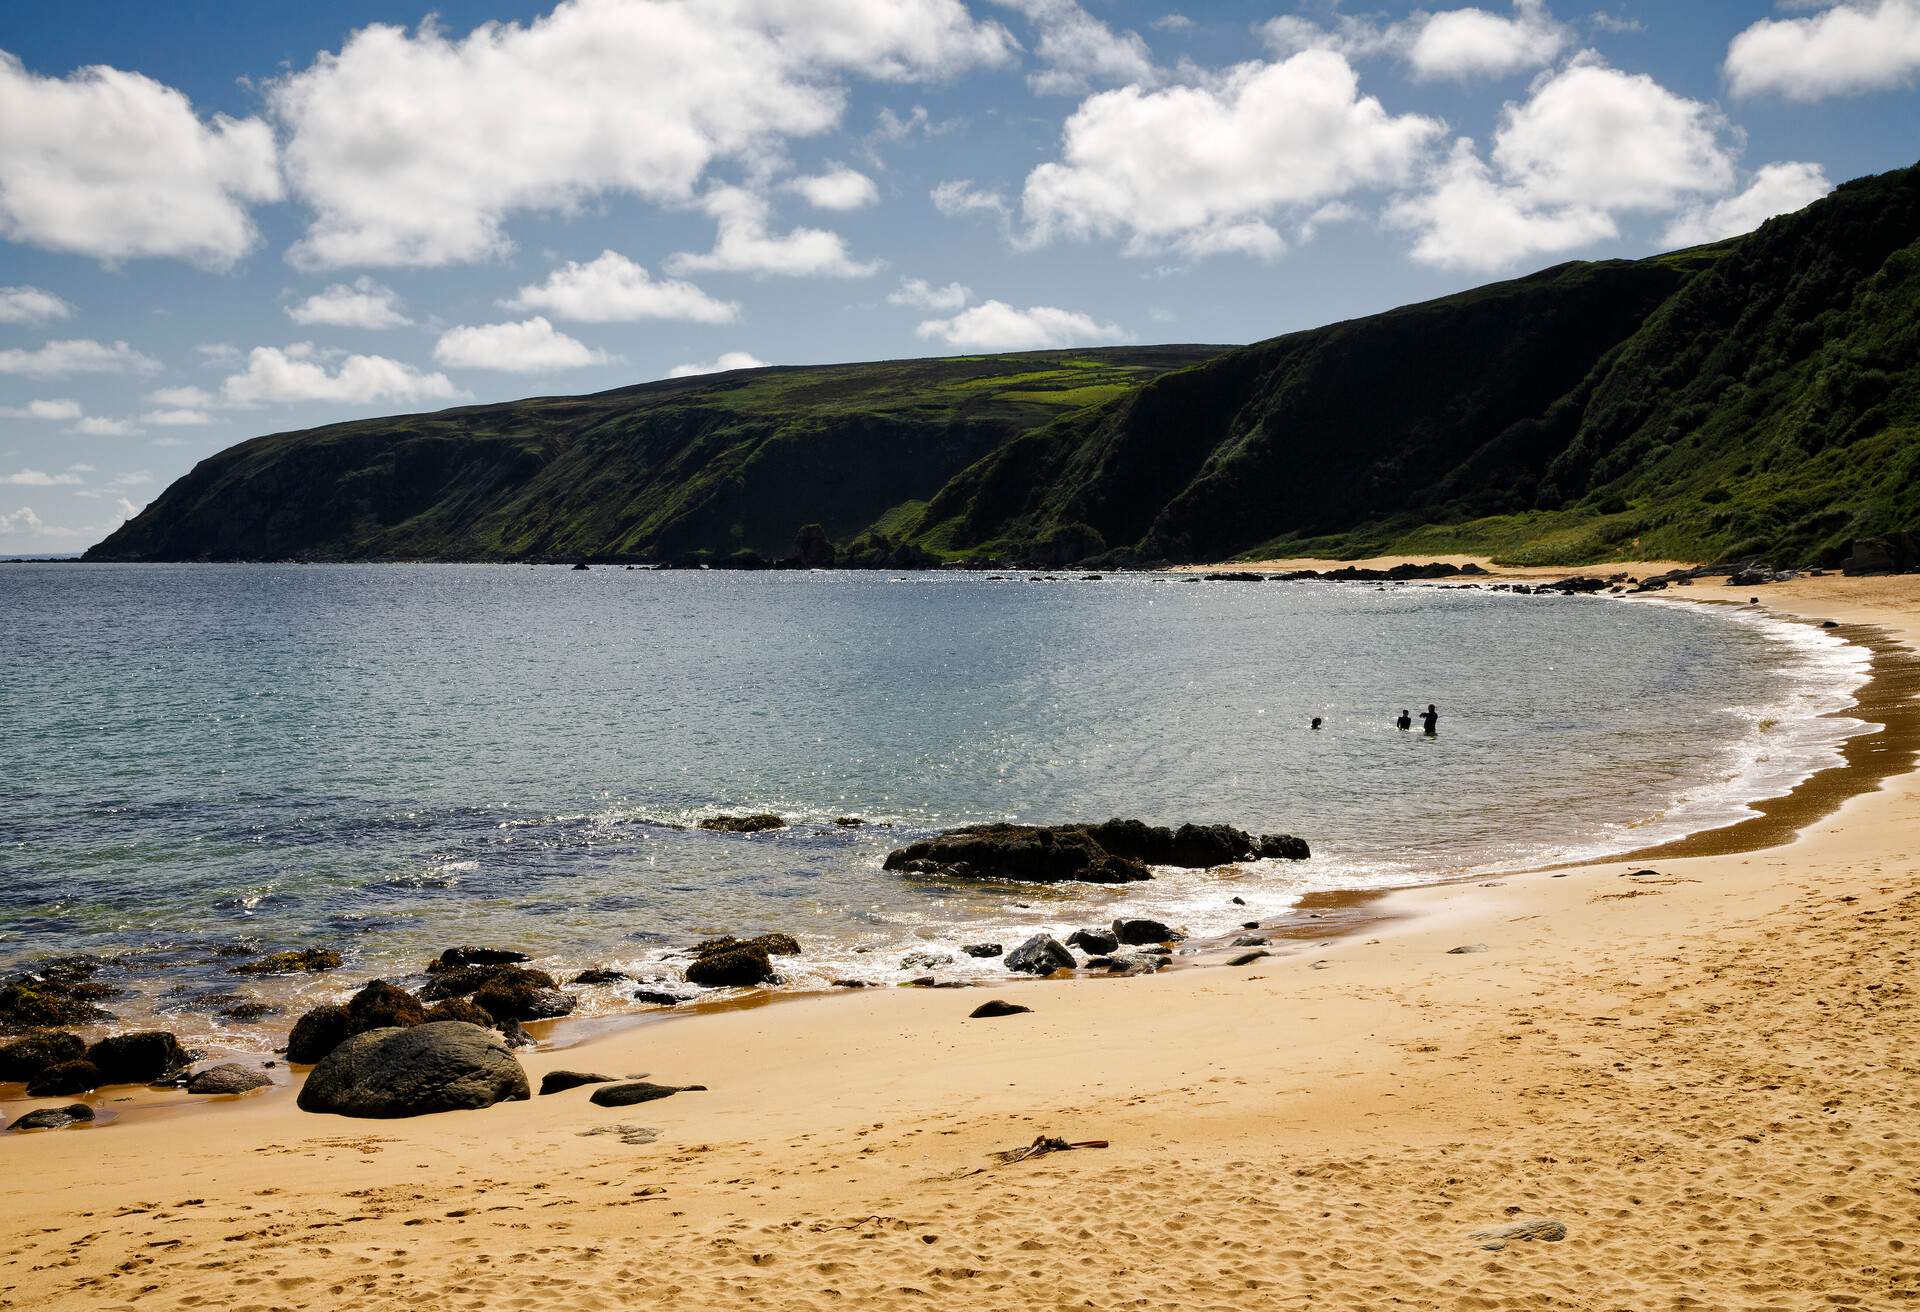 Kinnagoe Bay Beach is located on the Inishowen Peninsula in County Donegal. Access to the beach by a small winding road leading down through a casting cliff (Co. Donegal, Ireland).